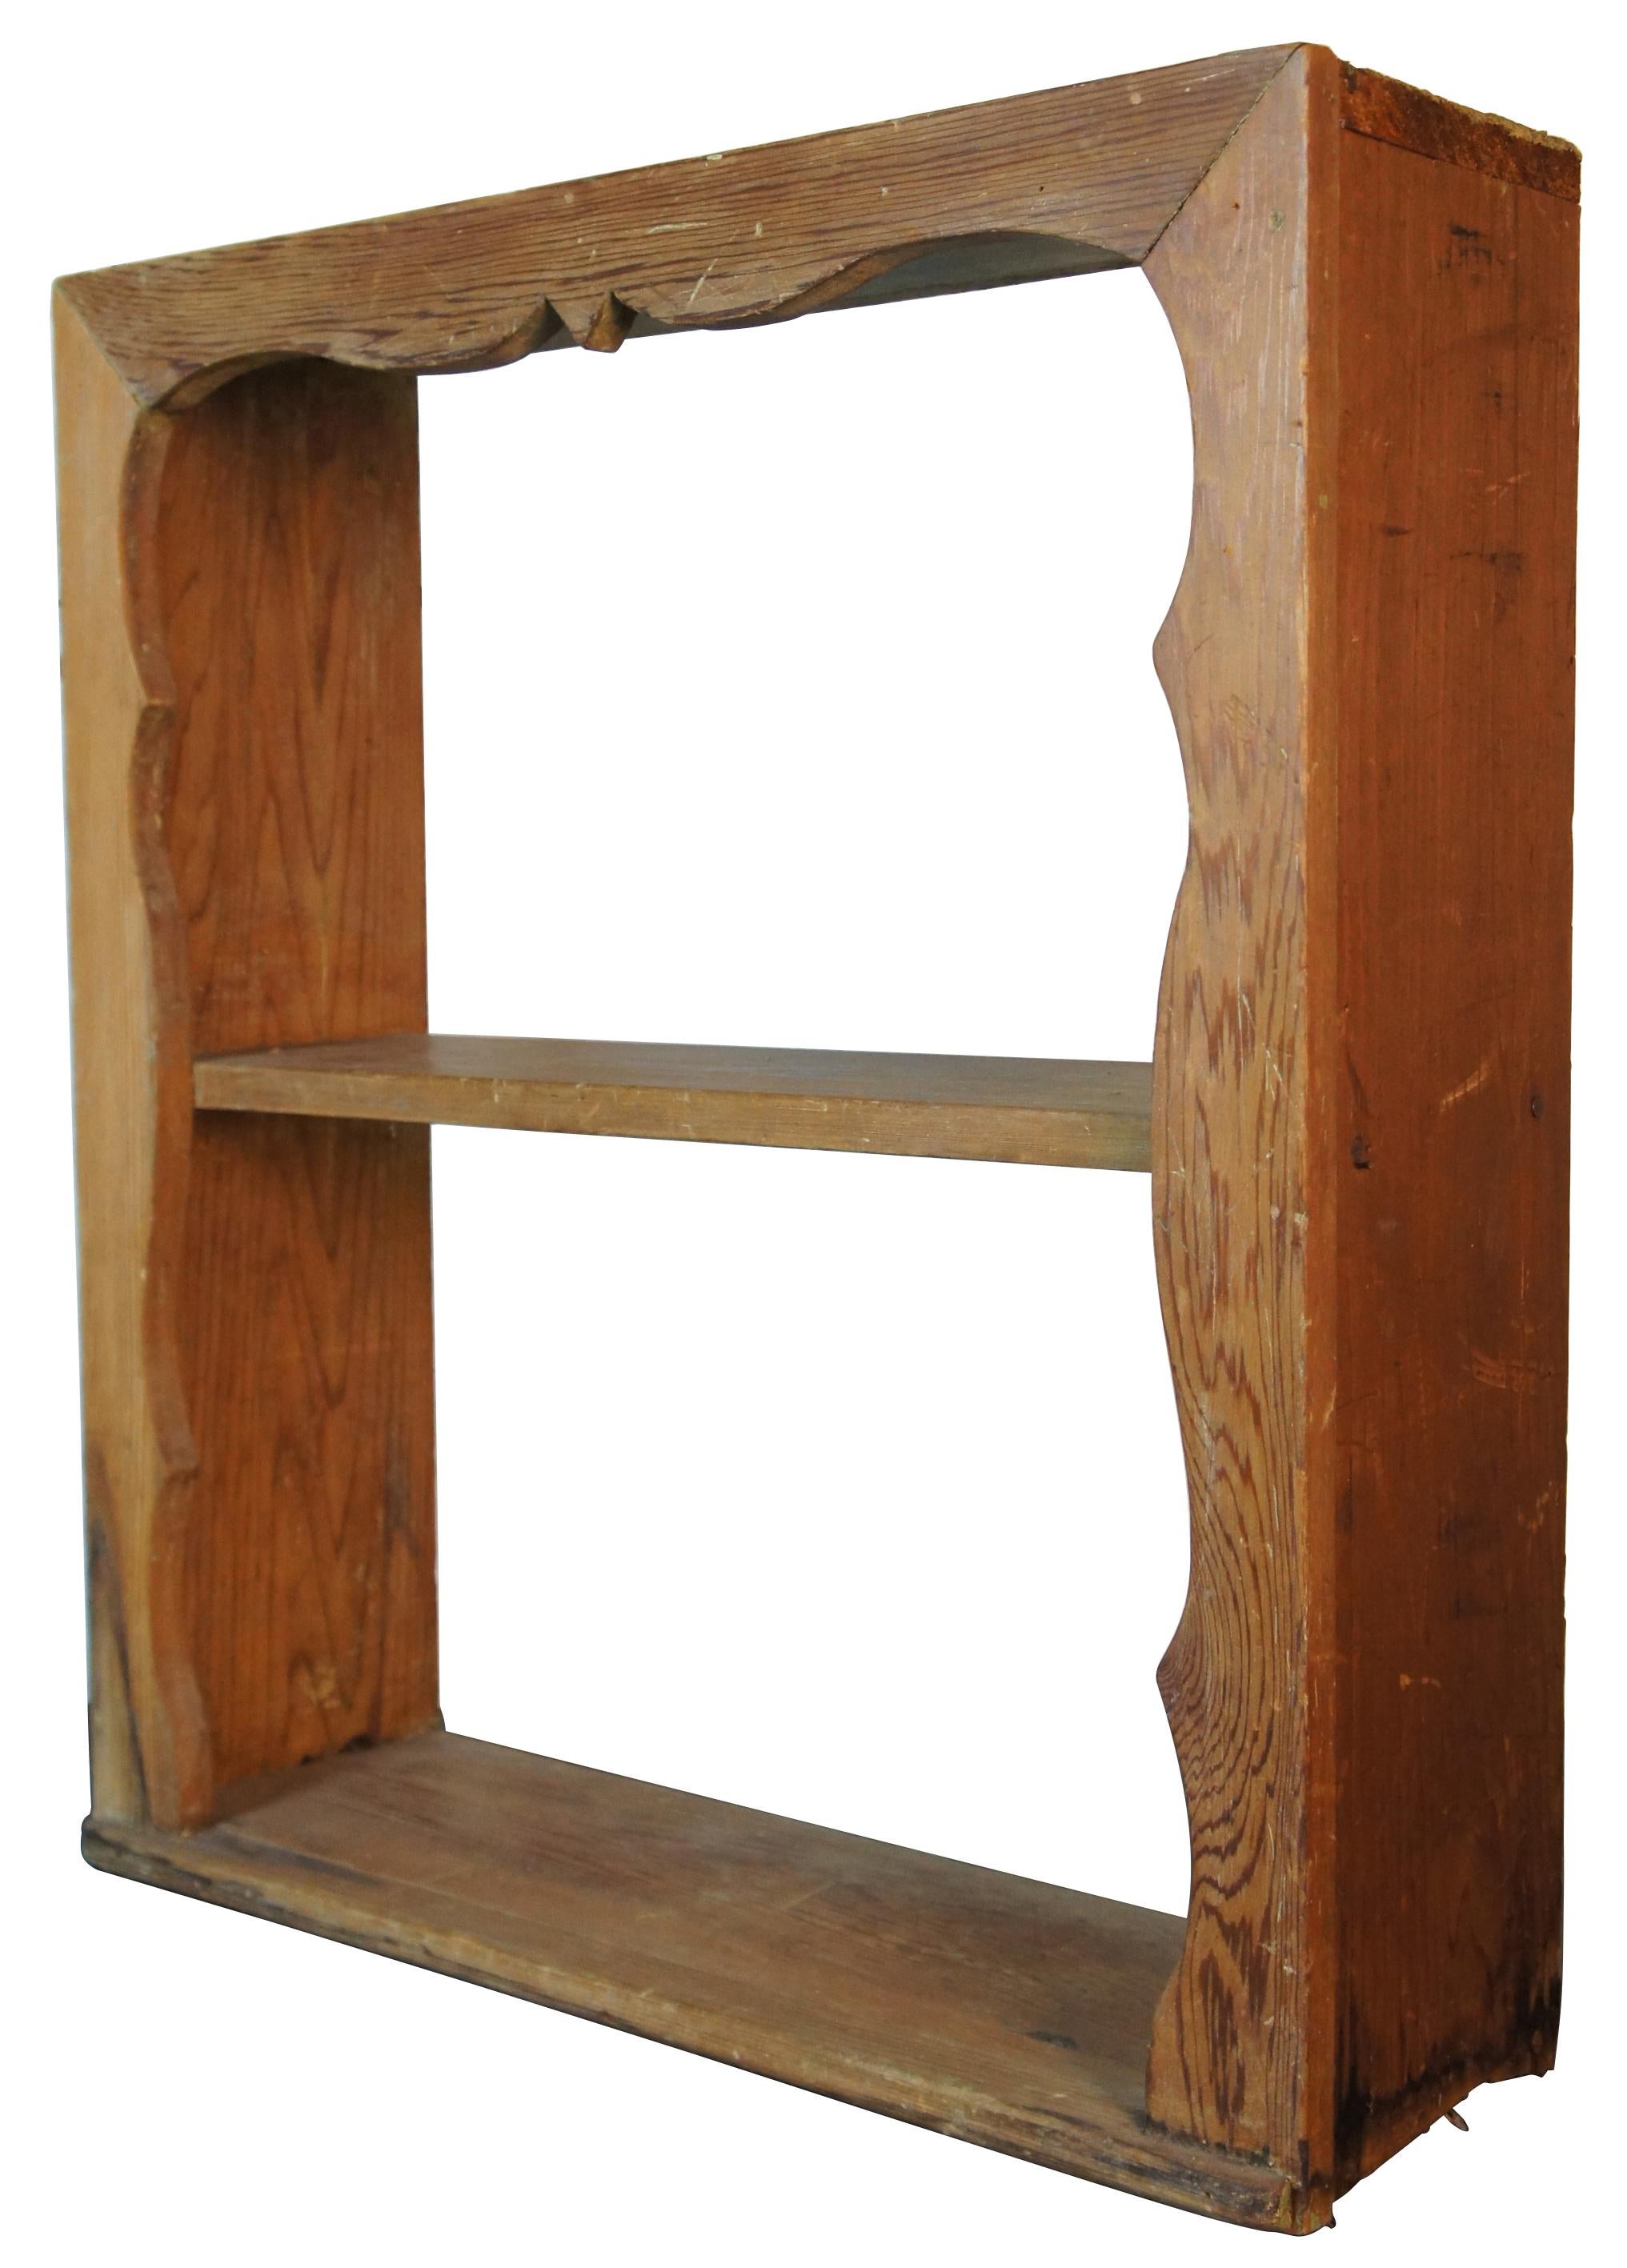 Antique natural pine wooden wall shelf with two tiers and serpentine form with proscenium style framed around the front. Measure: 27